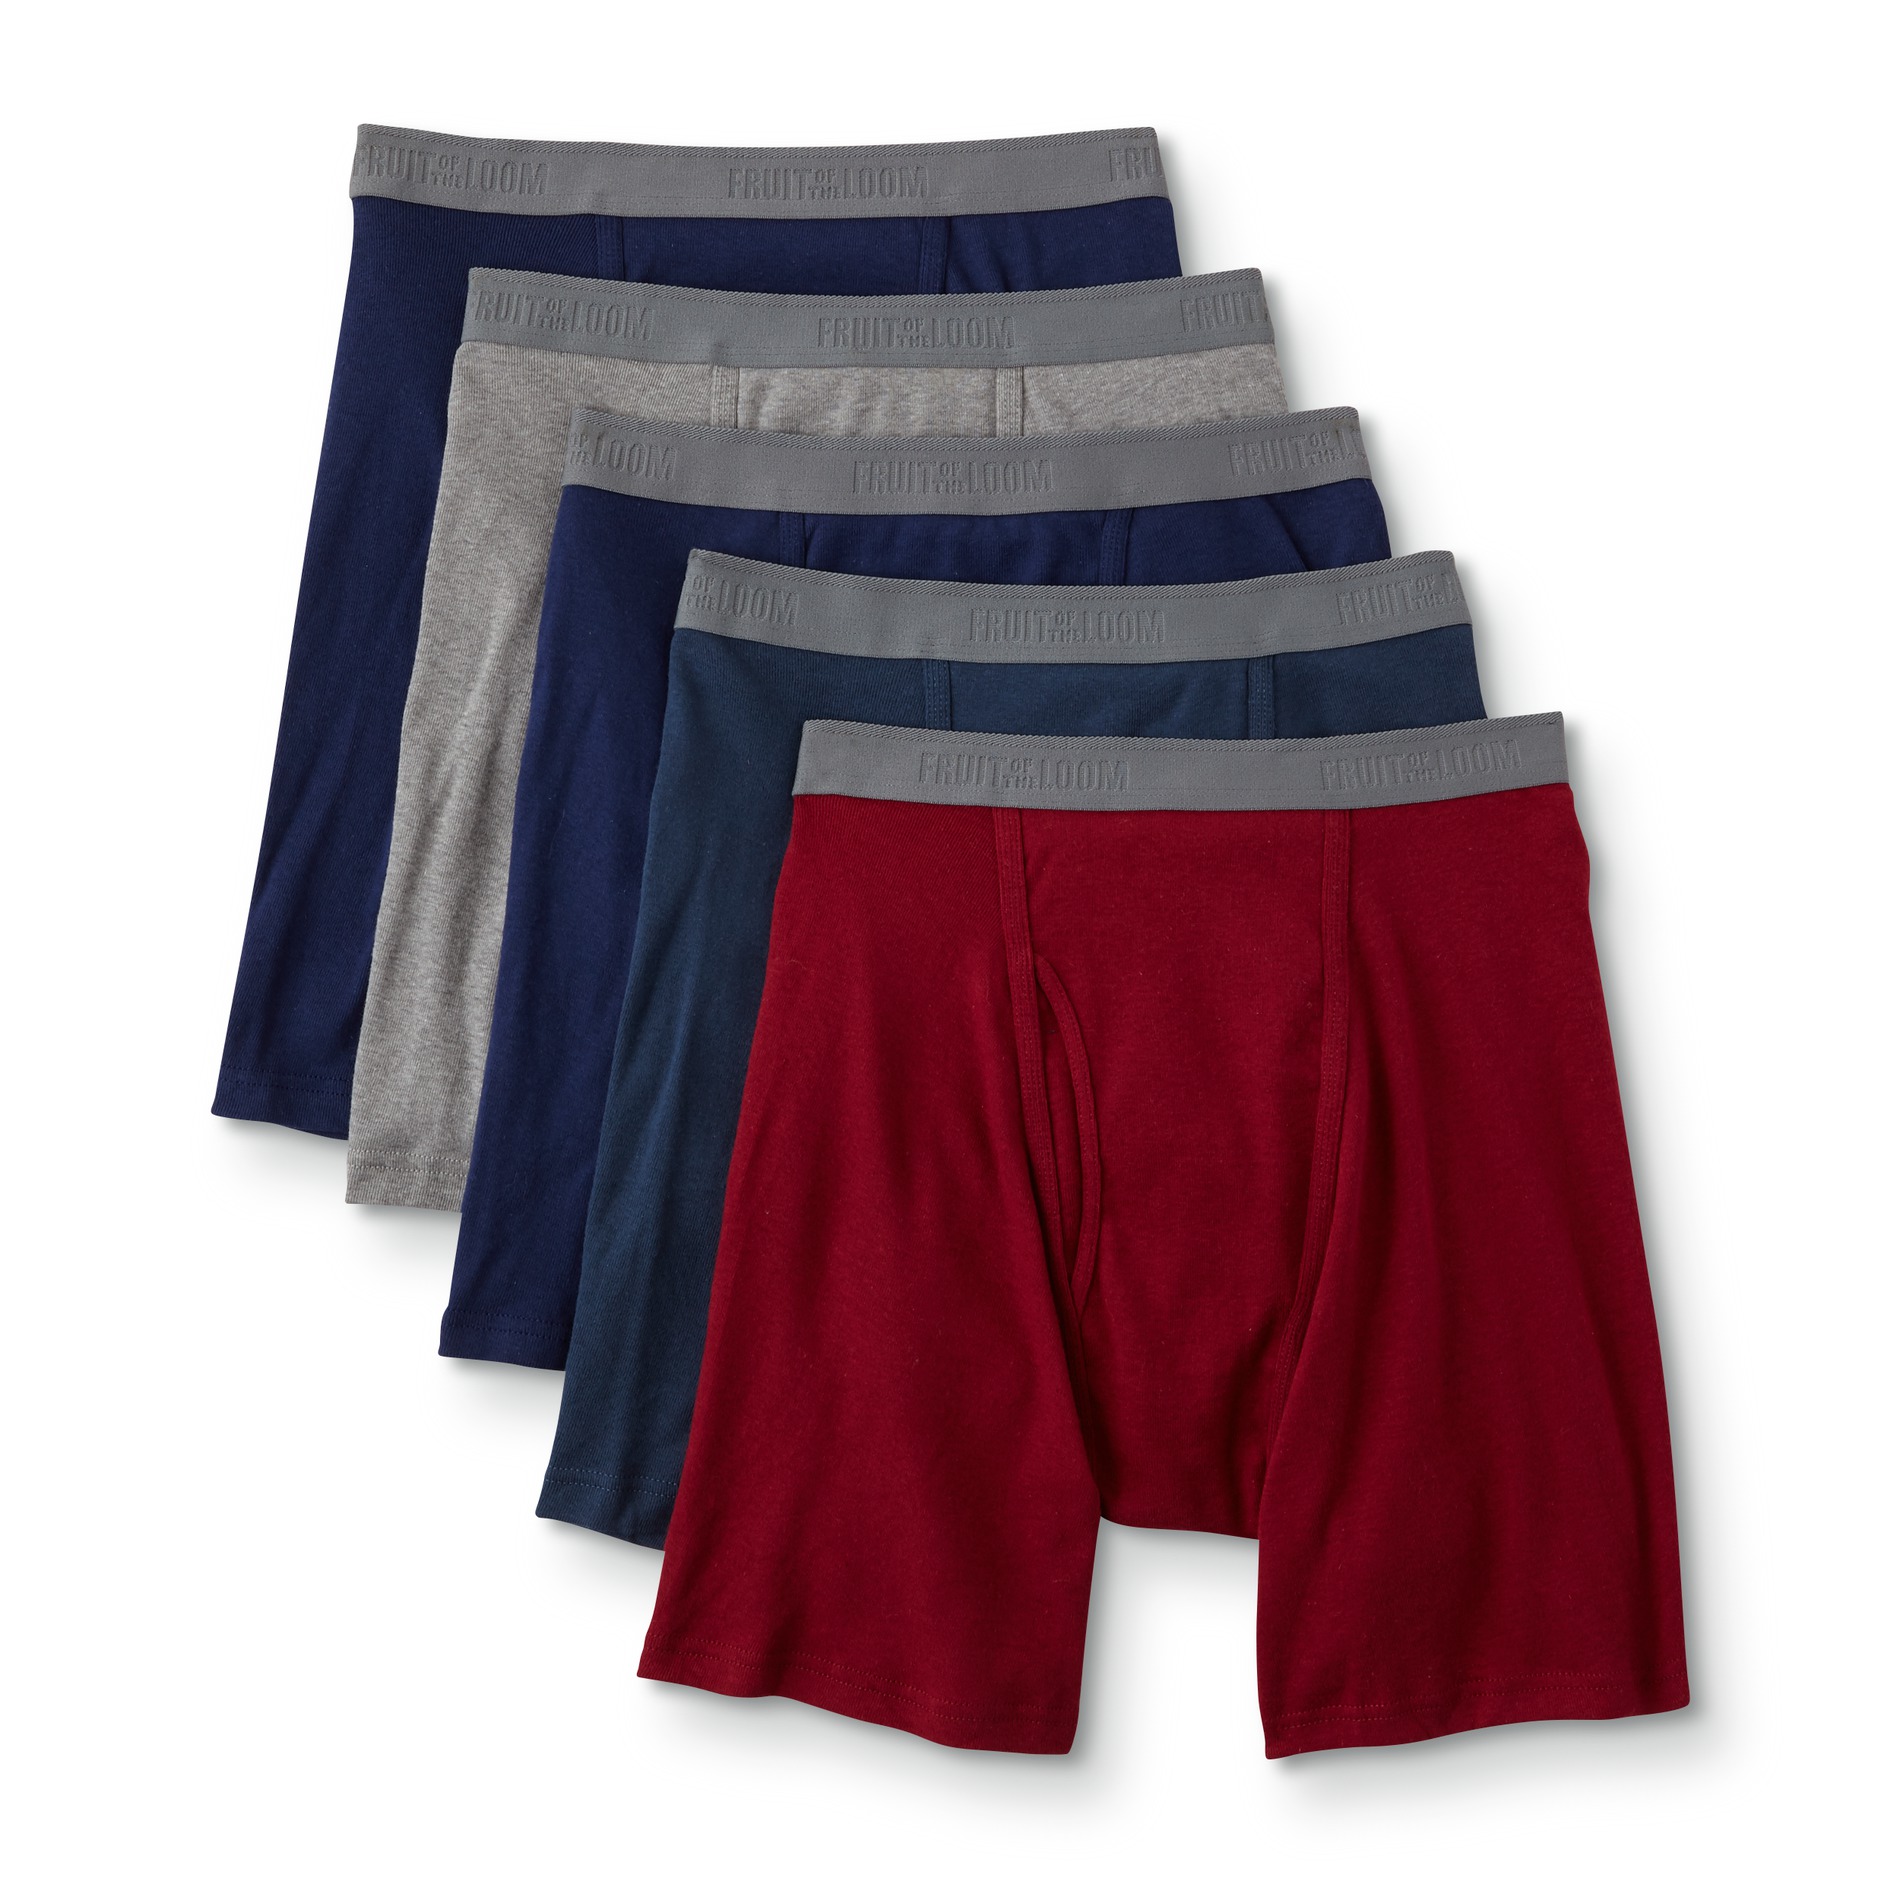 Fruit of the Loom Men's 5-Pack Boxer Briefs - Assorted Colors